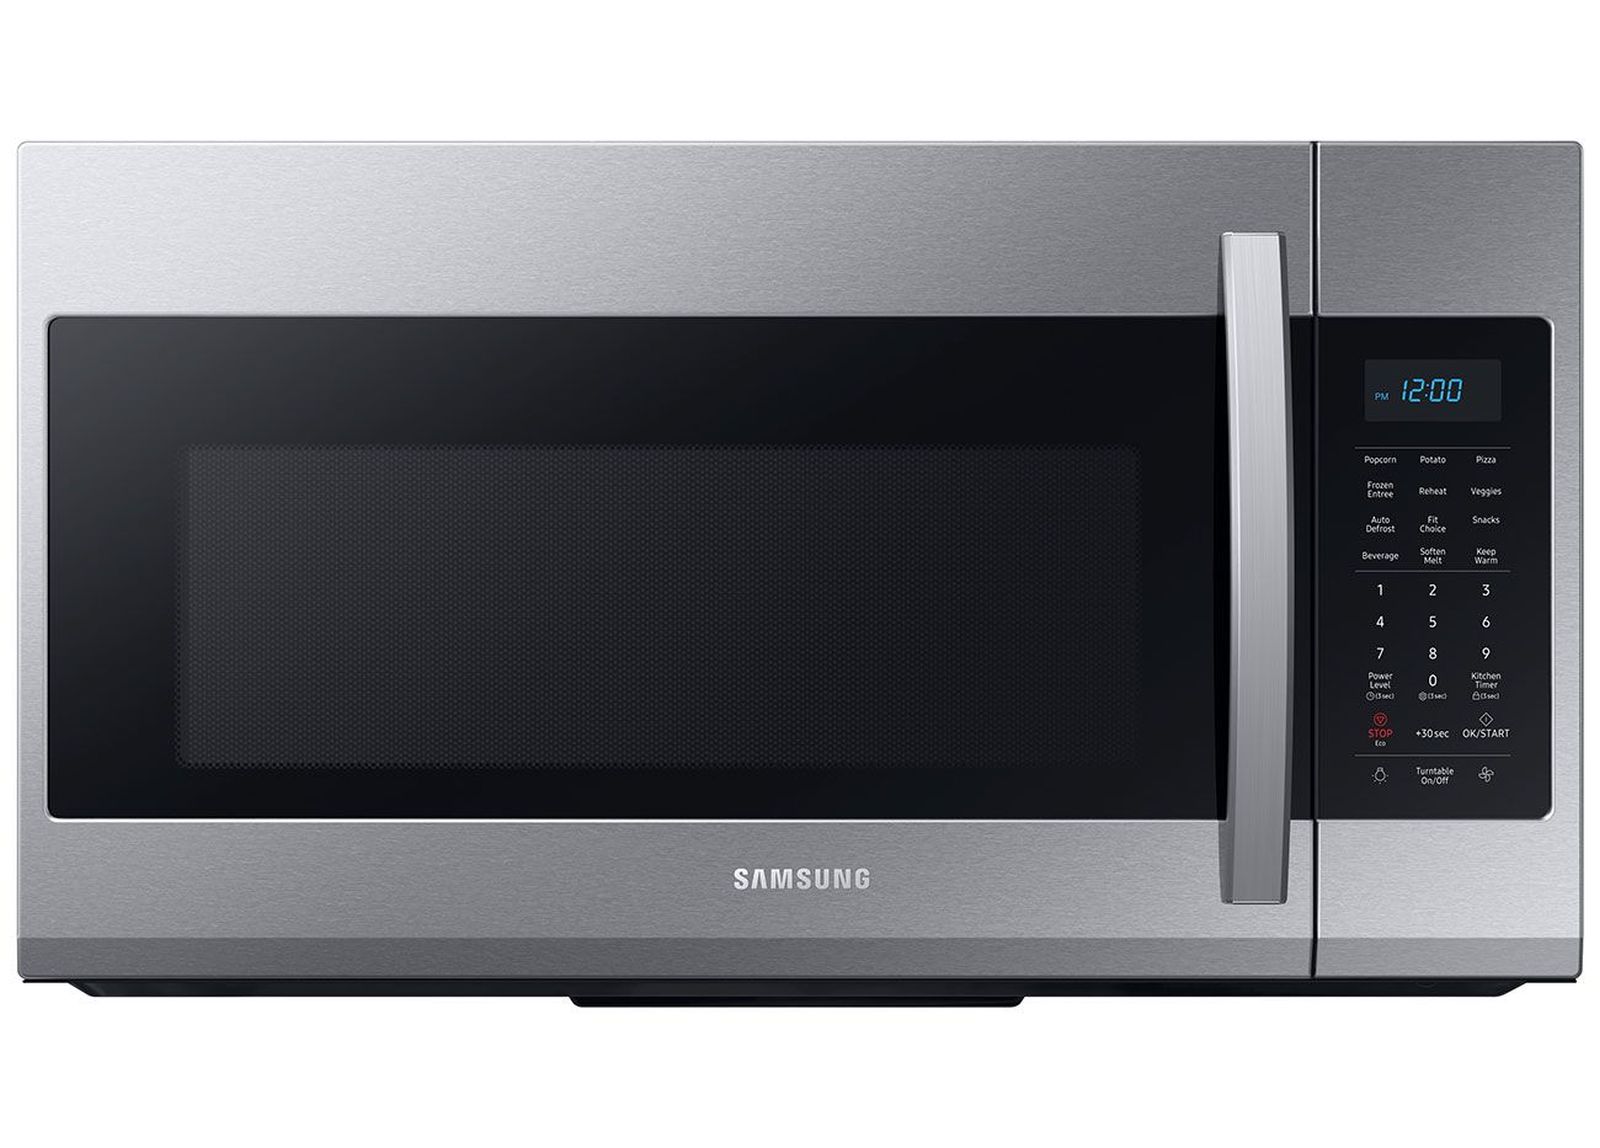 Samsung ME19R7041FS/AA 1.9 cu. ft. Over-the-Range Microwave with Sensor Cooking - Fingerprint Resistant Stainless Steel